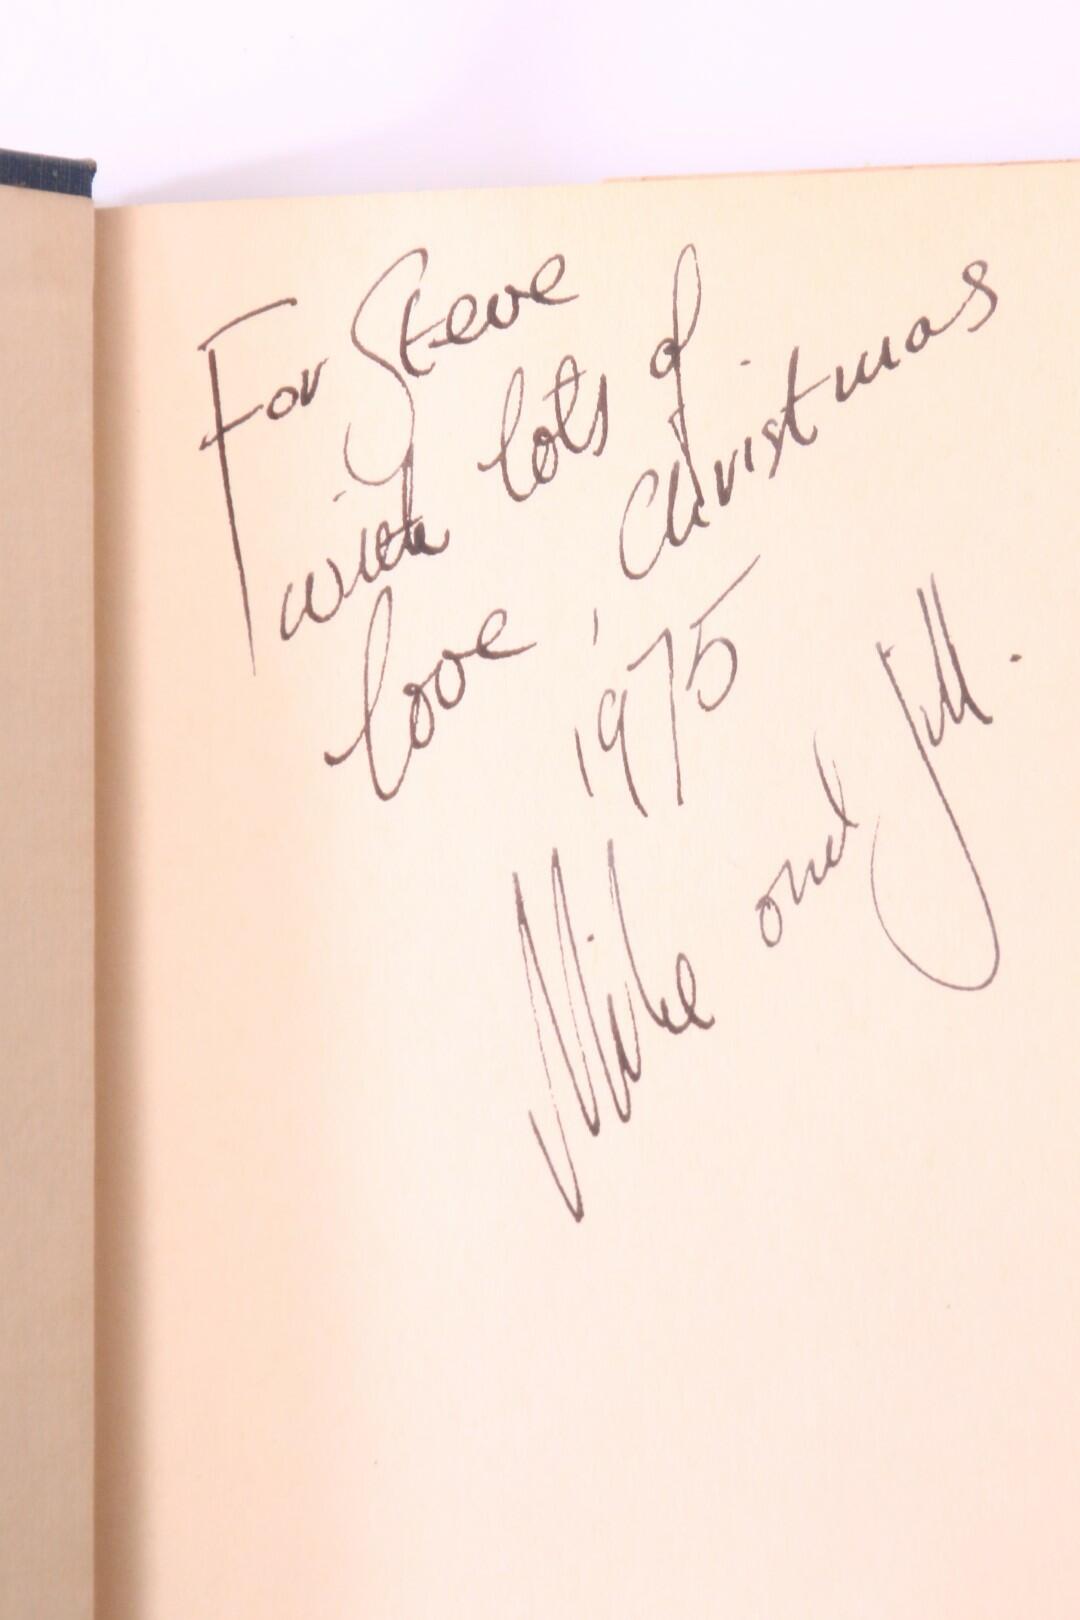 Michael Moorcock - Legends from the End of Time - Harper & Row, 1976, Signed First Edition.